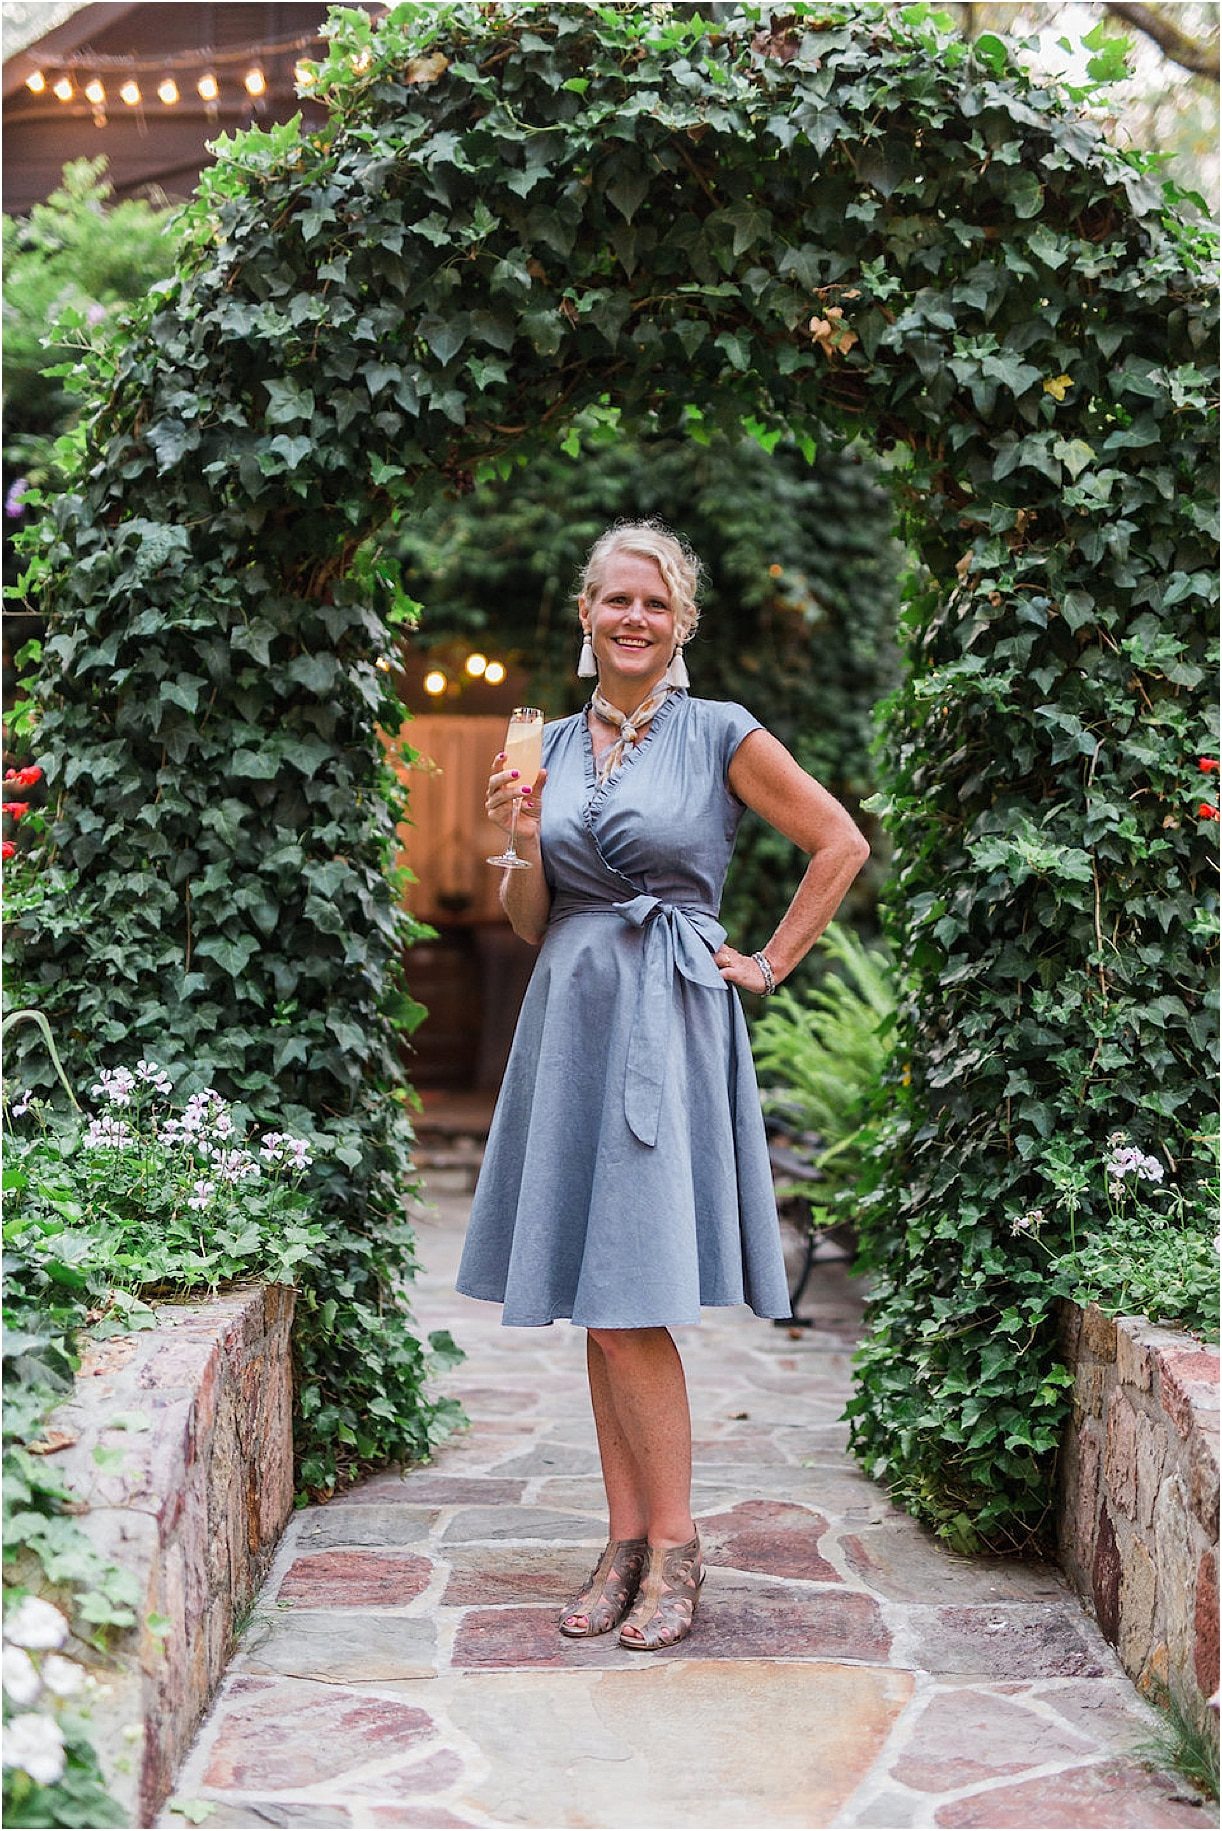 How to Wear Wine Country Fashion in Sonoma County California Chic Casual Formal | Hill City Bride Destination Wedding Virginia Weddings Blog